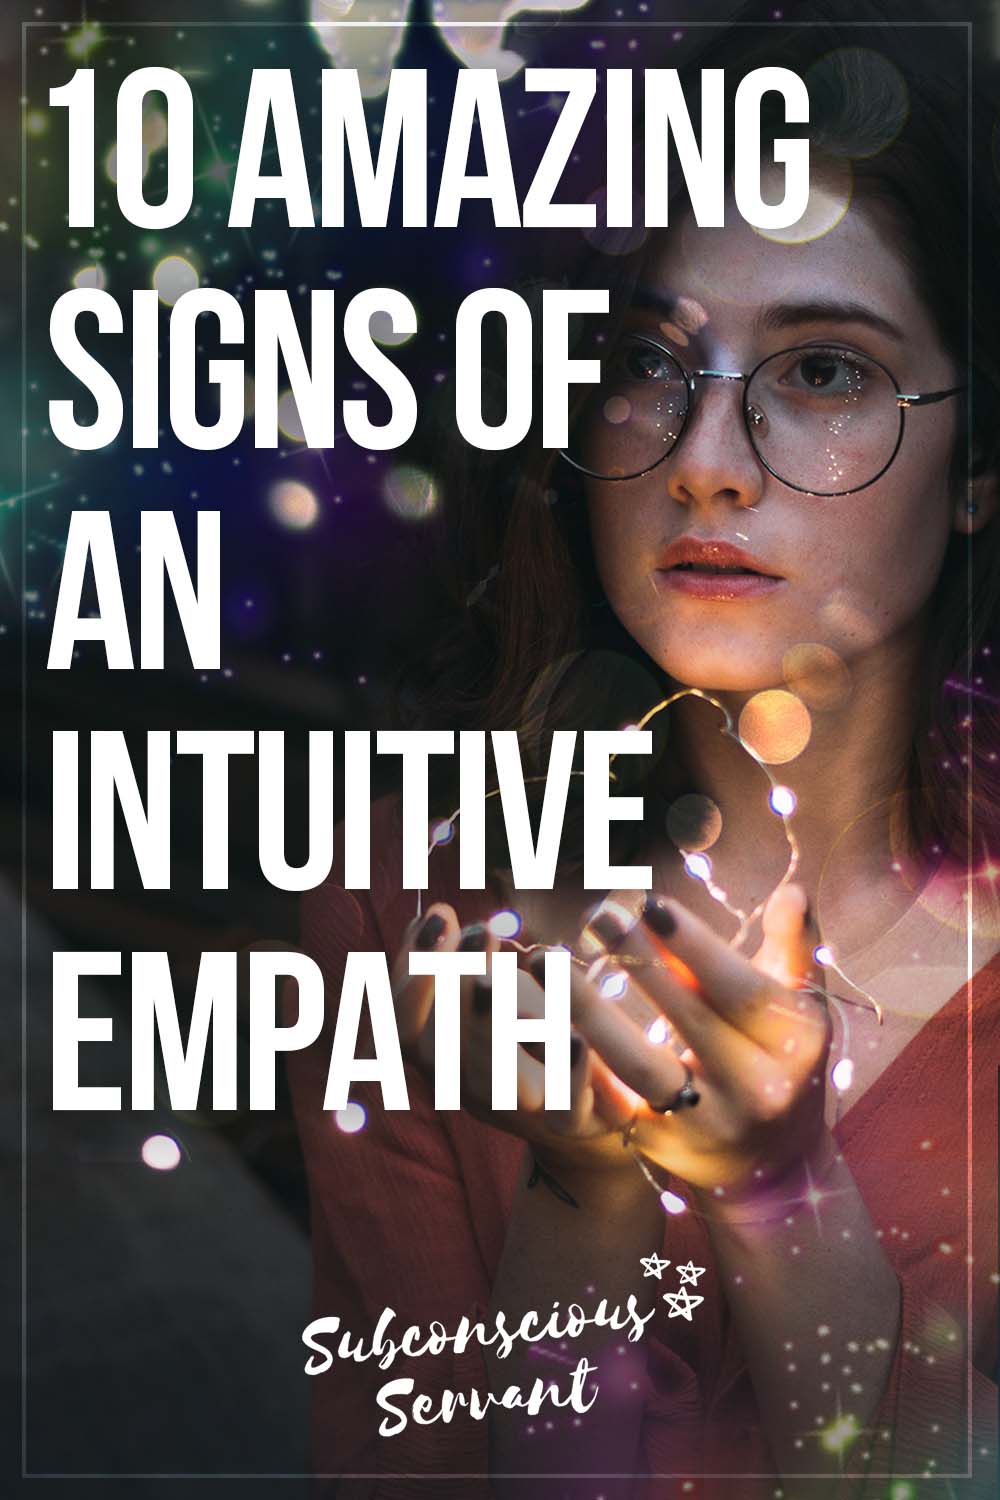 The Intuitive Empath: 10 Amazing Signs & Traits